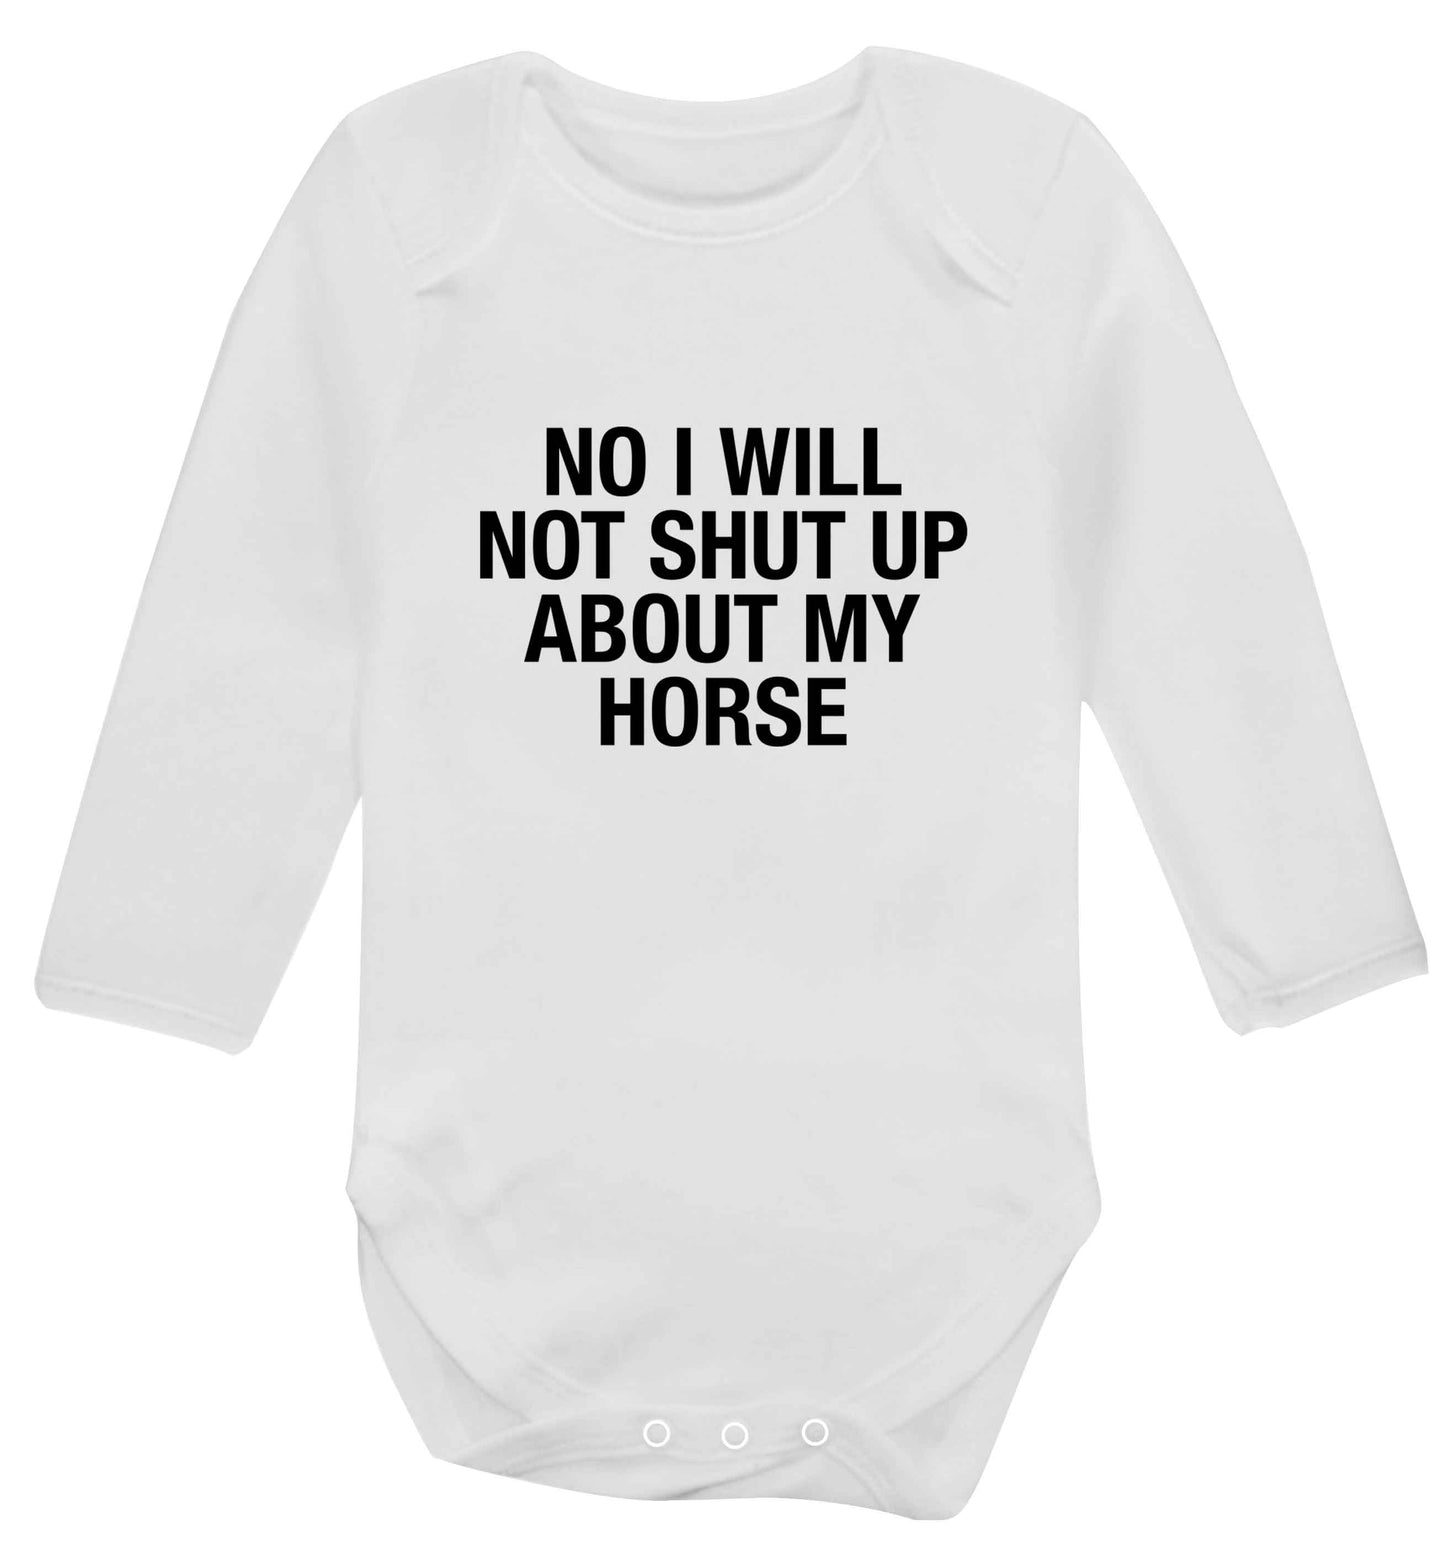 Warning may start talking about horses baby vest long sleeved white 6-12 months